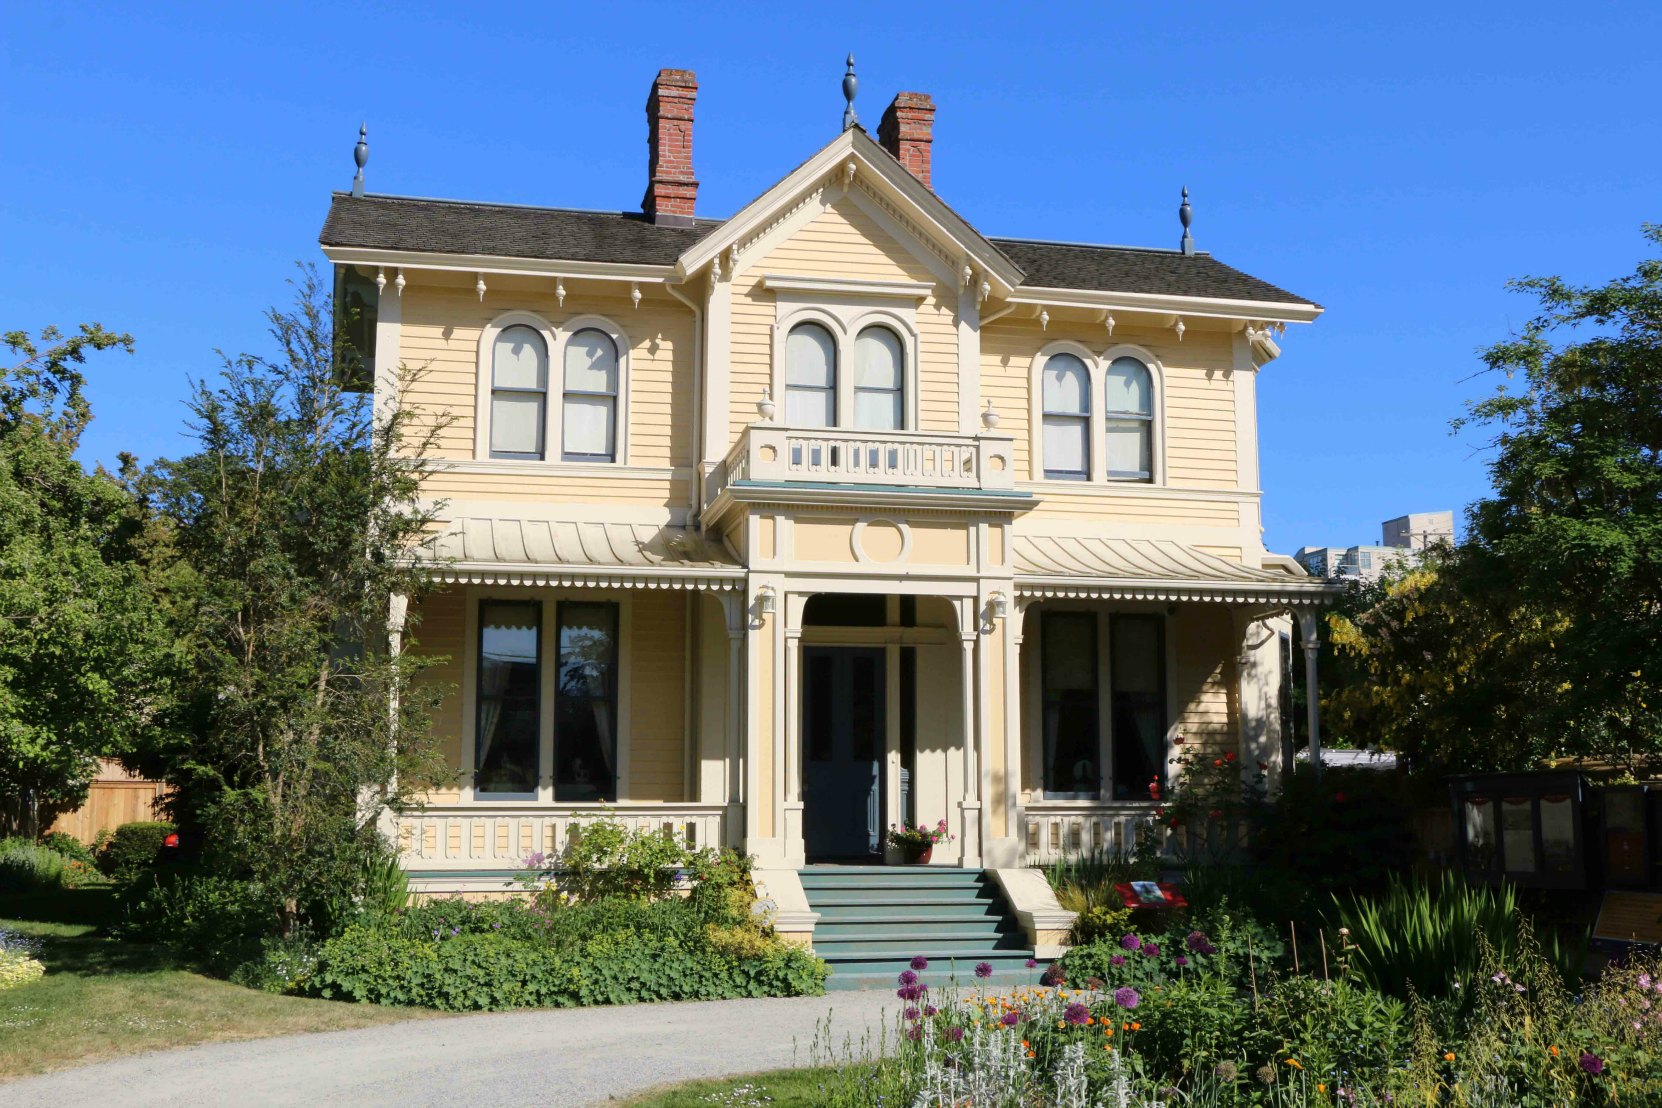 The Emily Carr House, 207 Government Street, Victoria, B.C. (photo by Victoria Online Sightseeing)